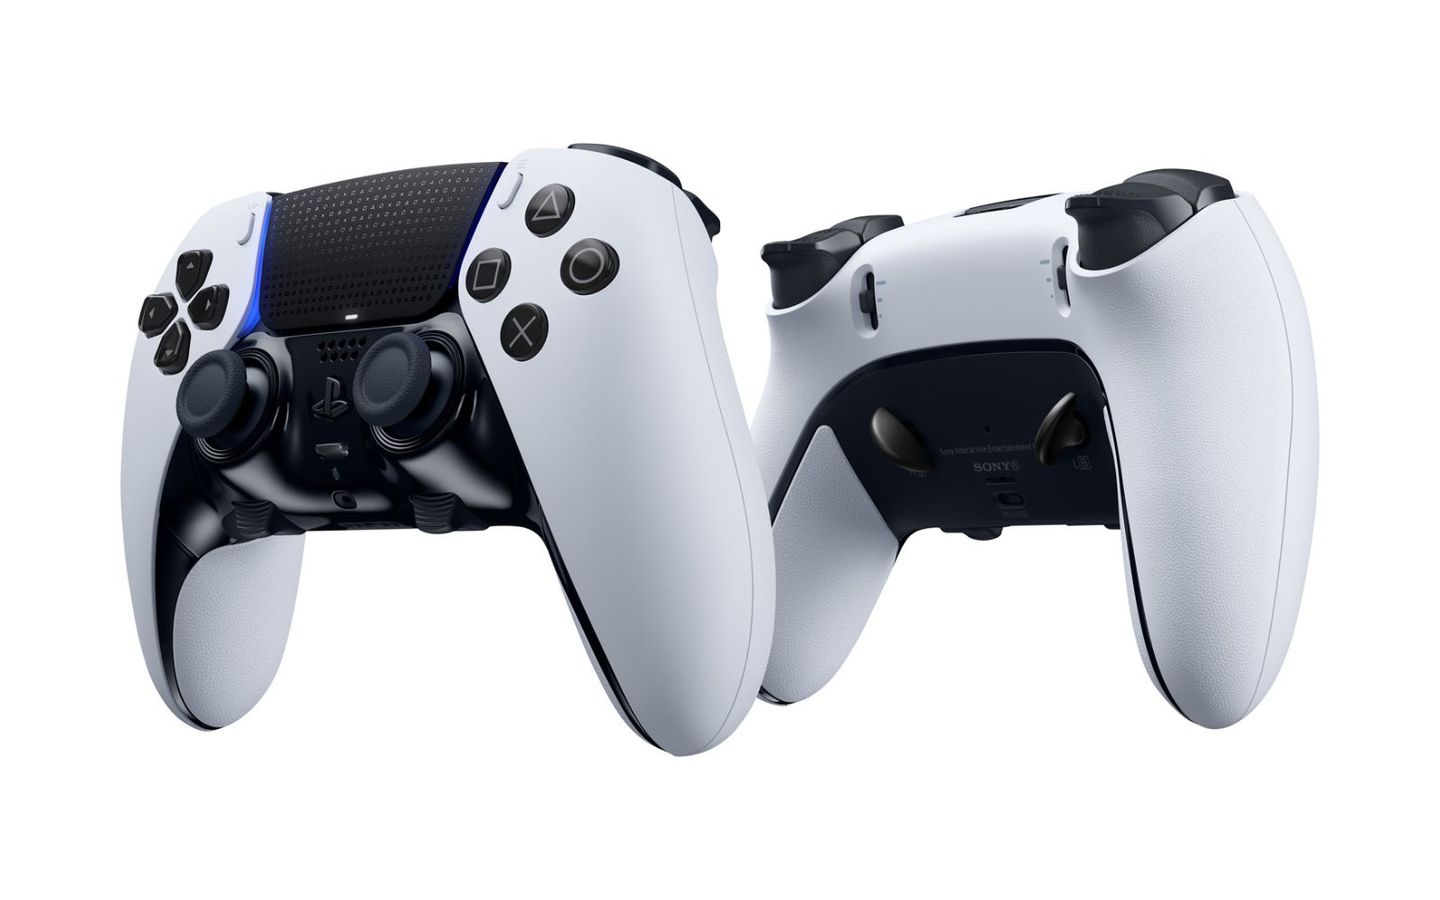 DualSense Edge product image of a white and black PlayStation controller featuring blue lighting shot from front and back.